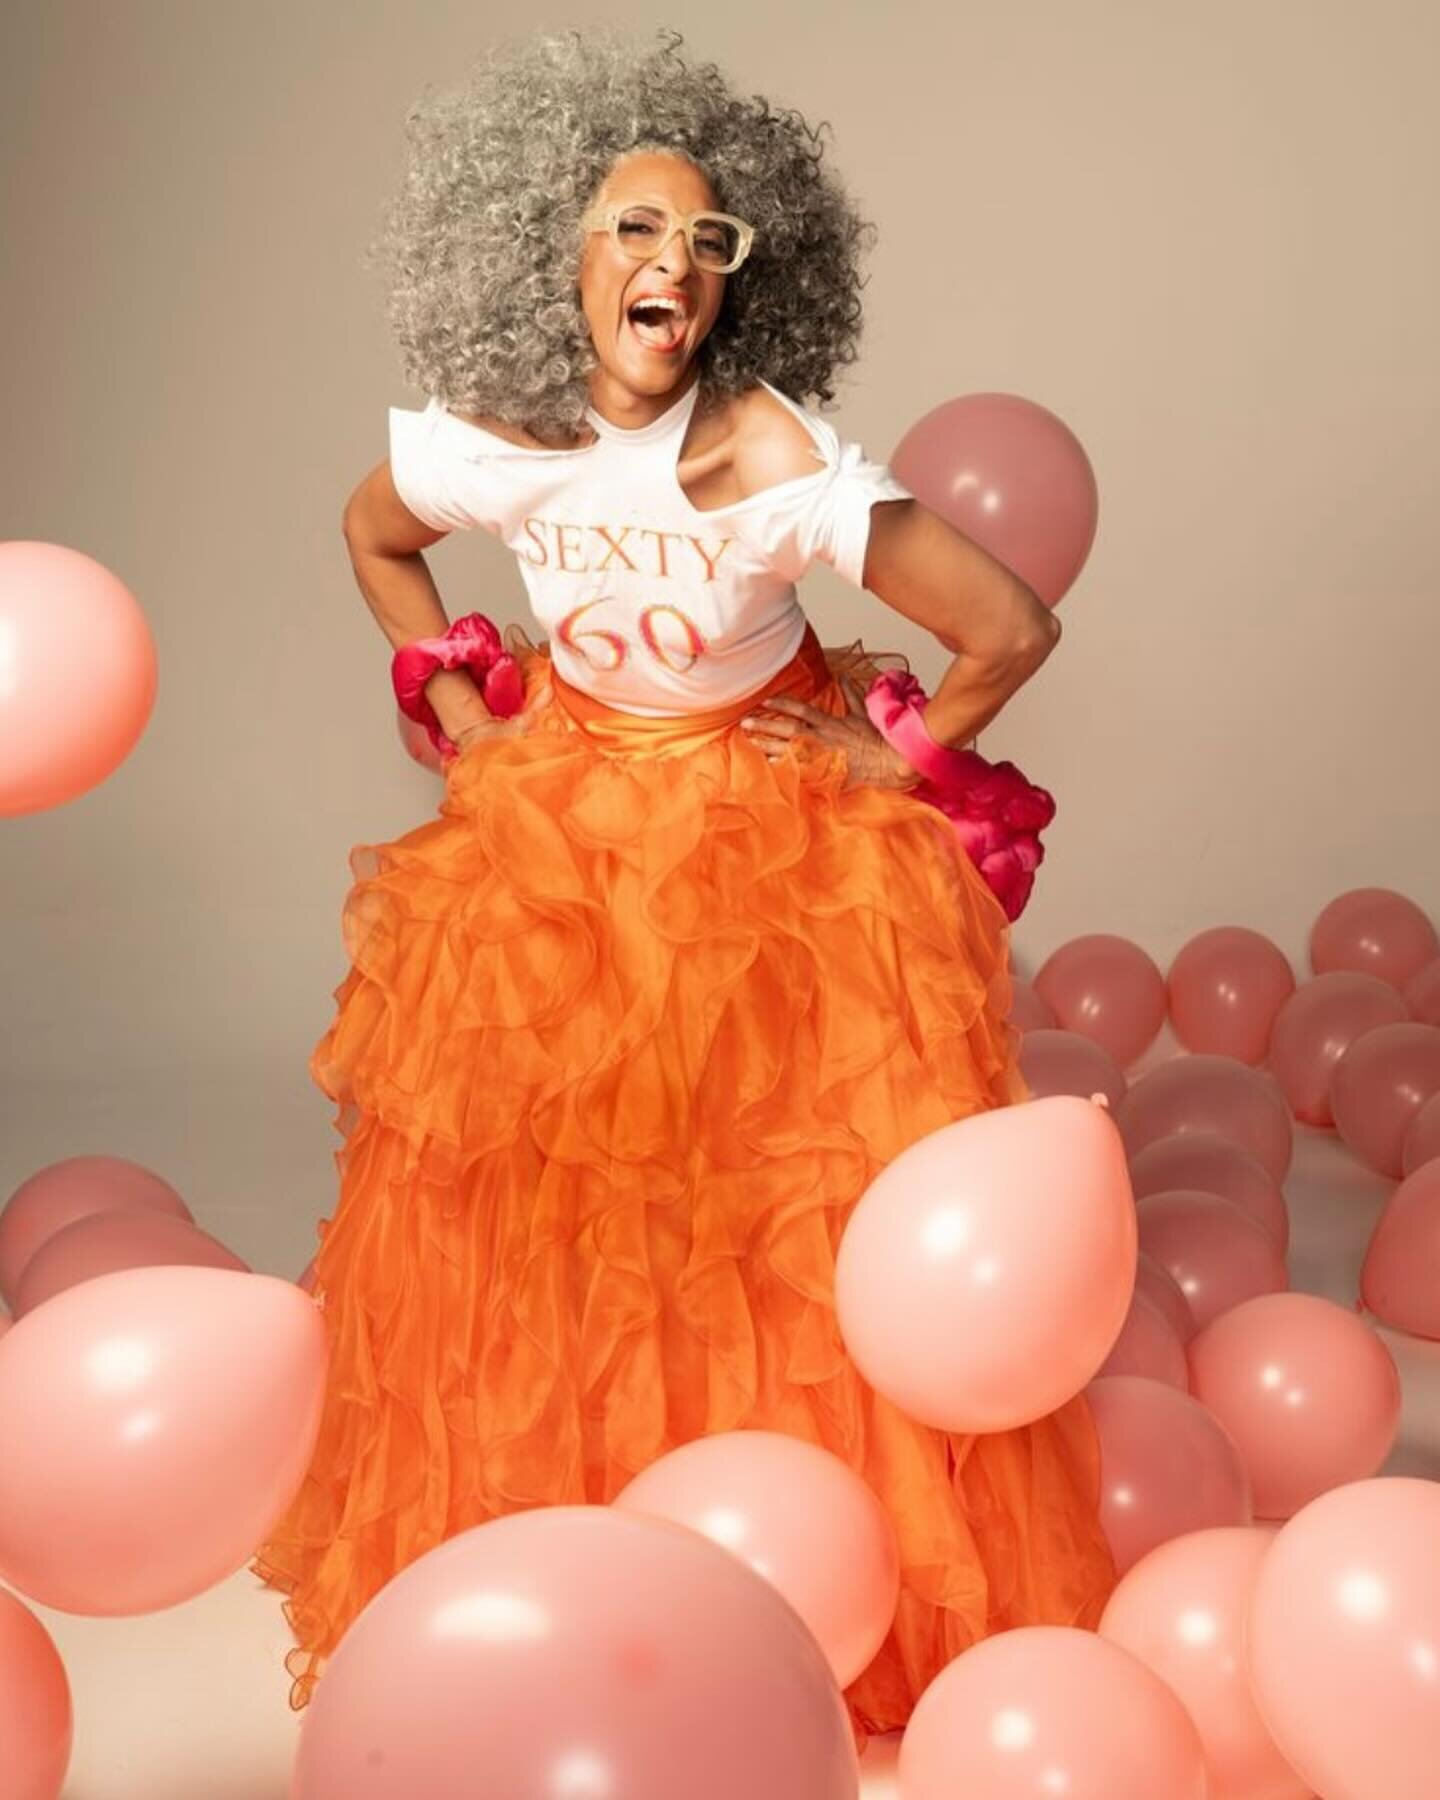 Excited to see this fun shoot in @people. Had such a great time as always working with my favorite chef and fellow Taurean 😉, Carla Hall. Hootie hoo!
Photog: @king_marvino 
Wardrobe @hair2style62